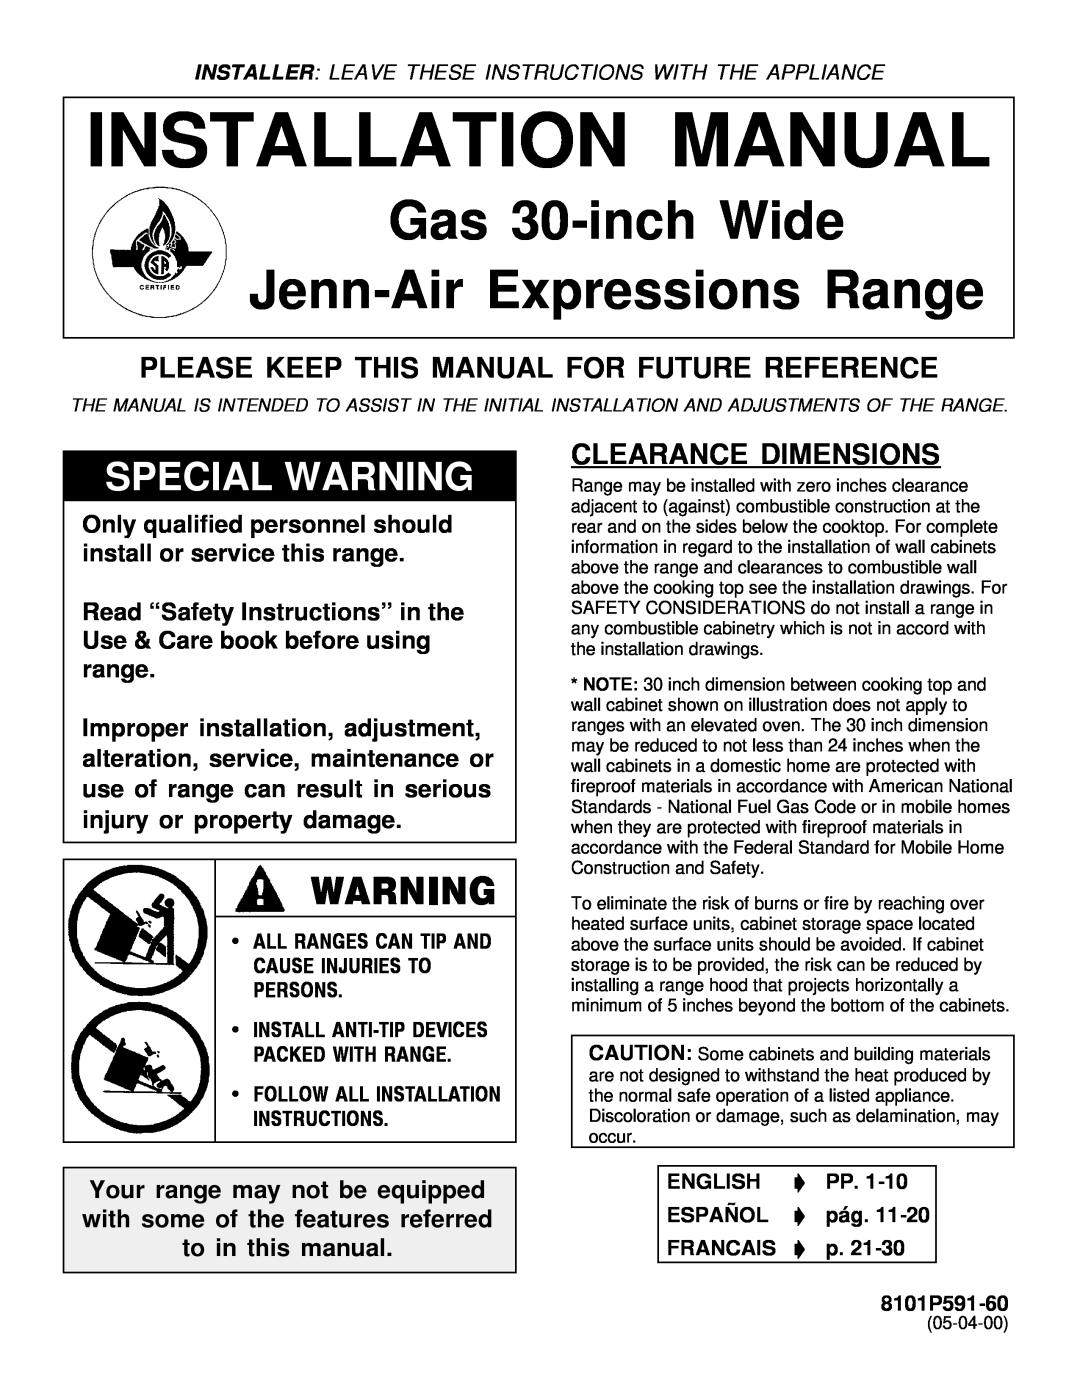 Jenn-Air Range installation manual Please Keep This Manual For Future Reference, Clearance Dimensions, Installation Manual 